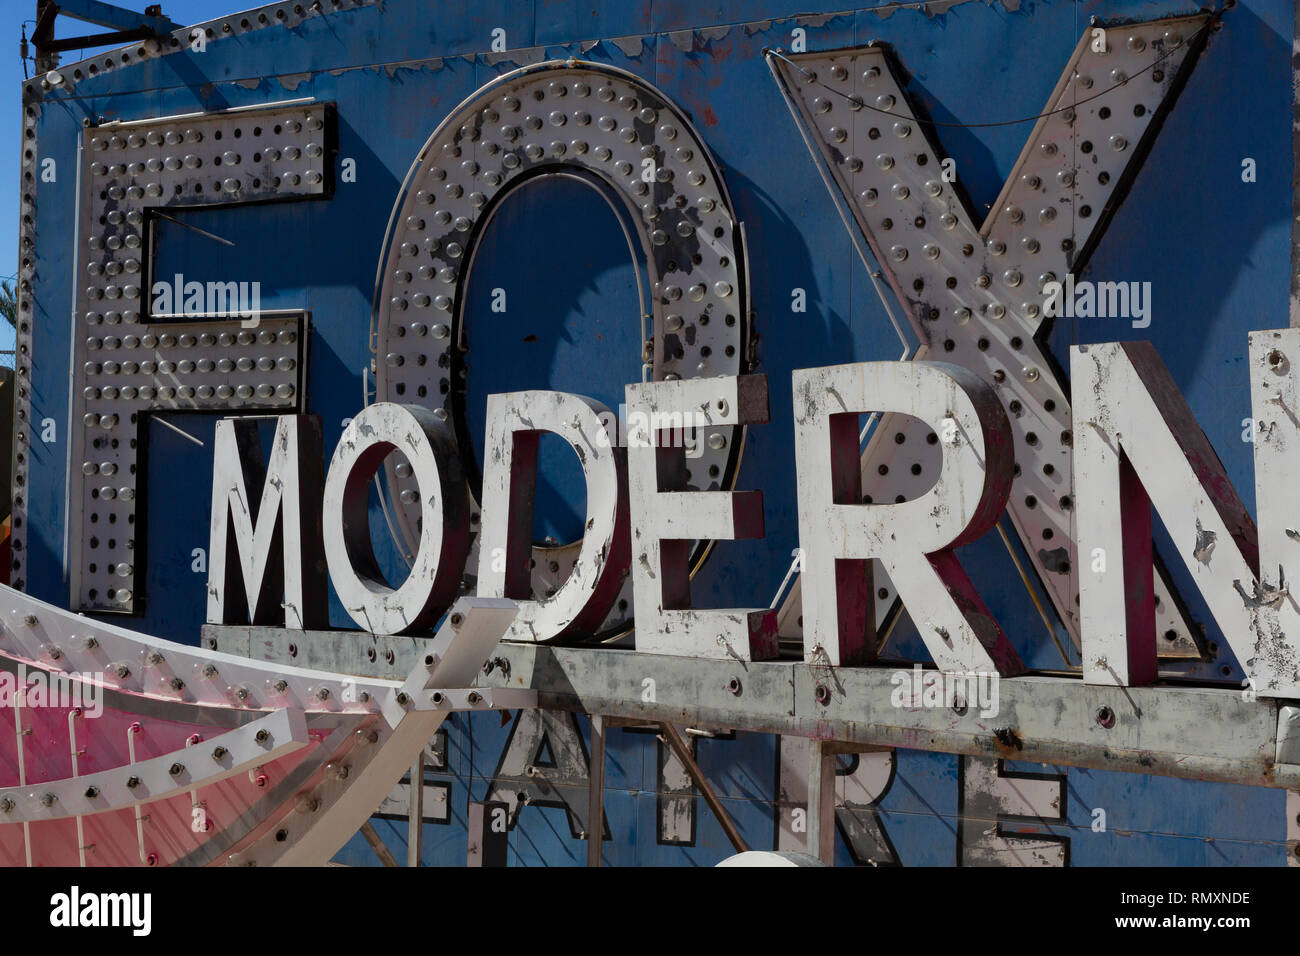 Las Vegas, Nevada the Neon Boneyard Museum which has retired neon signs from old Las Vegas businesses and casinos. USA Stock Photo